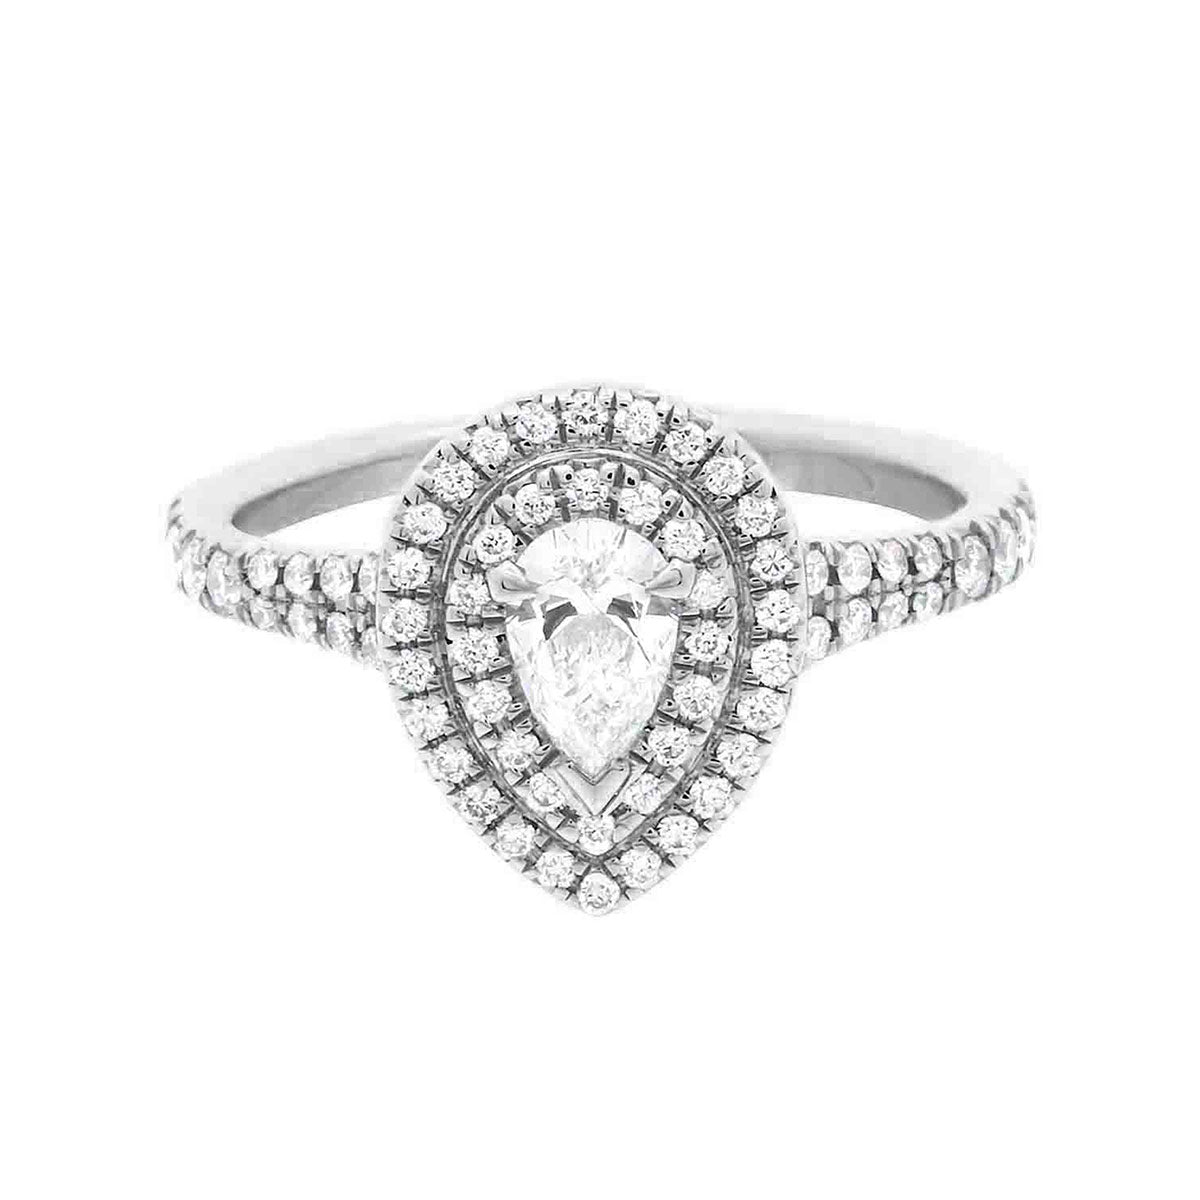 Double Halo Pear Diamond Ring in white gold